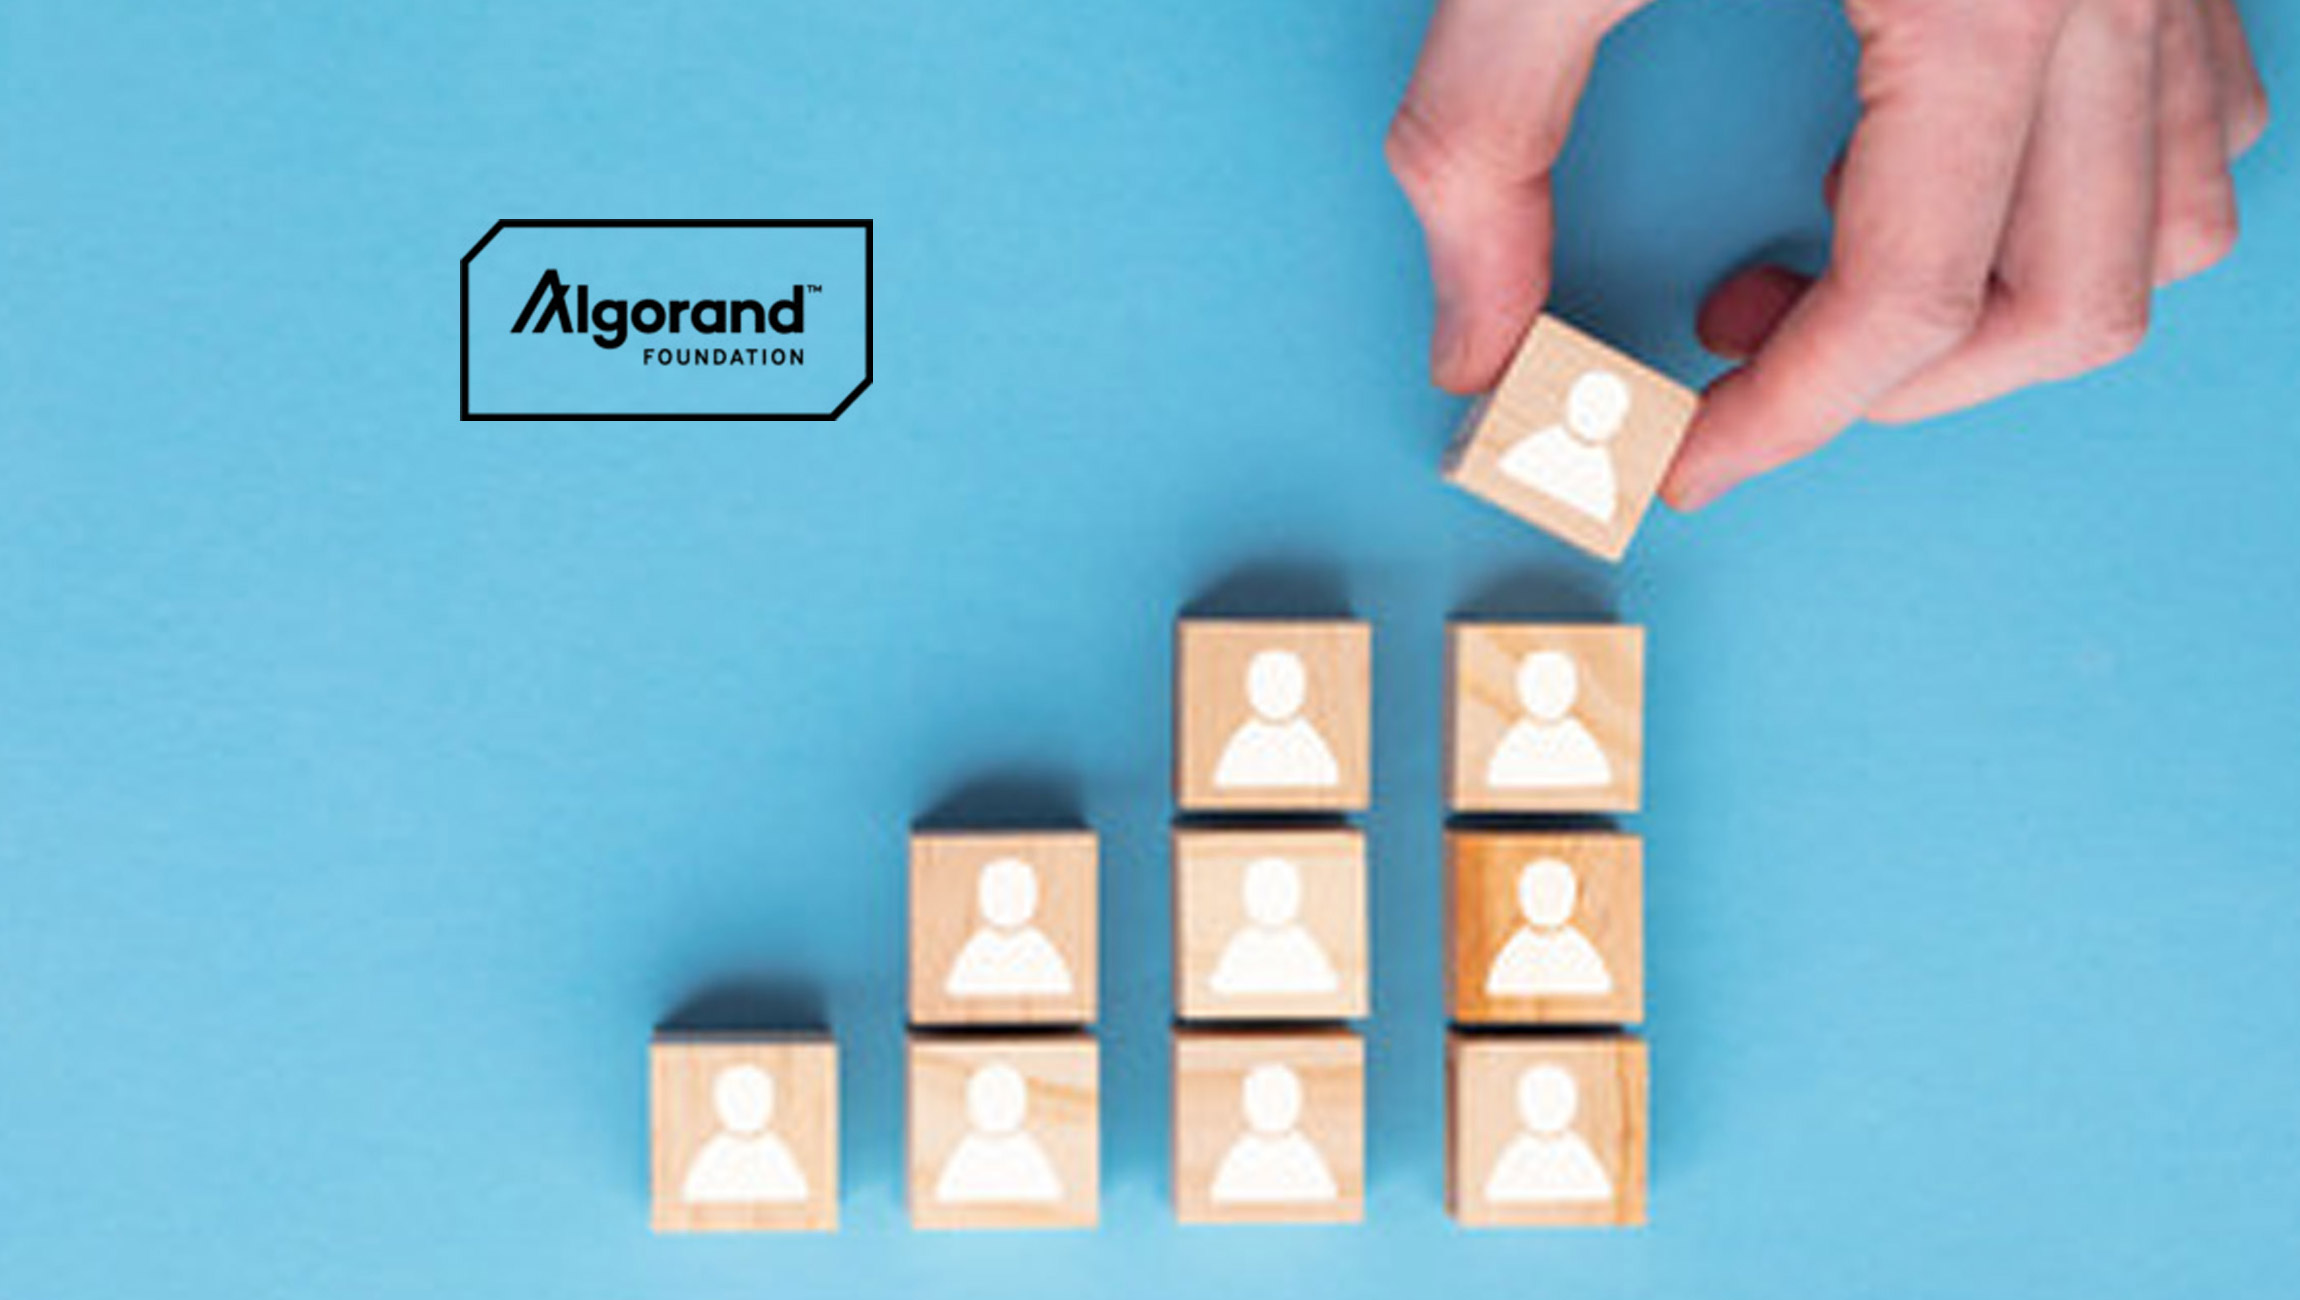 Algorand Foundation Announces Matthew Keller as the Director of Impact and Inclusion